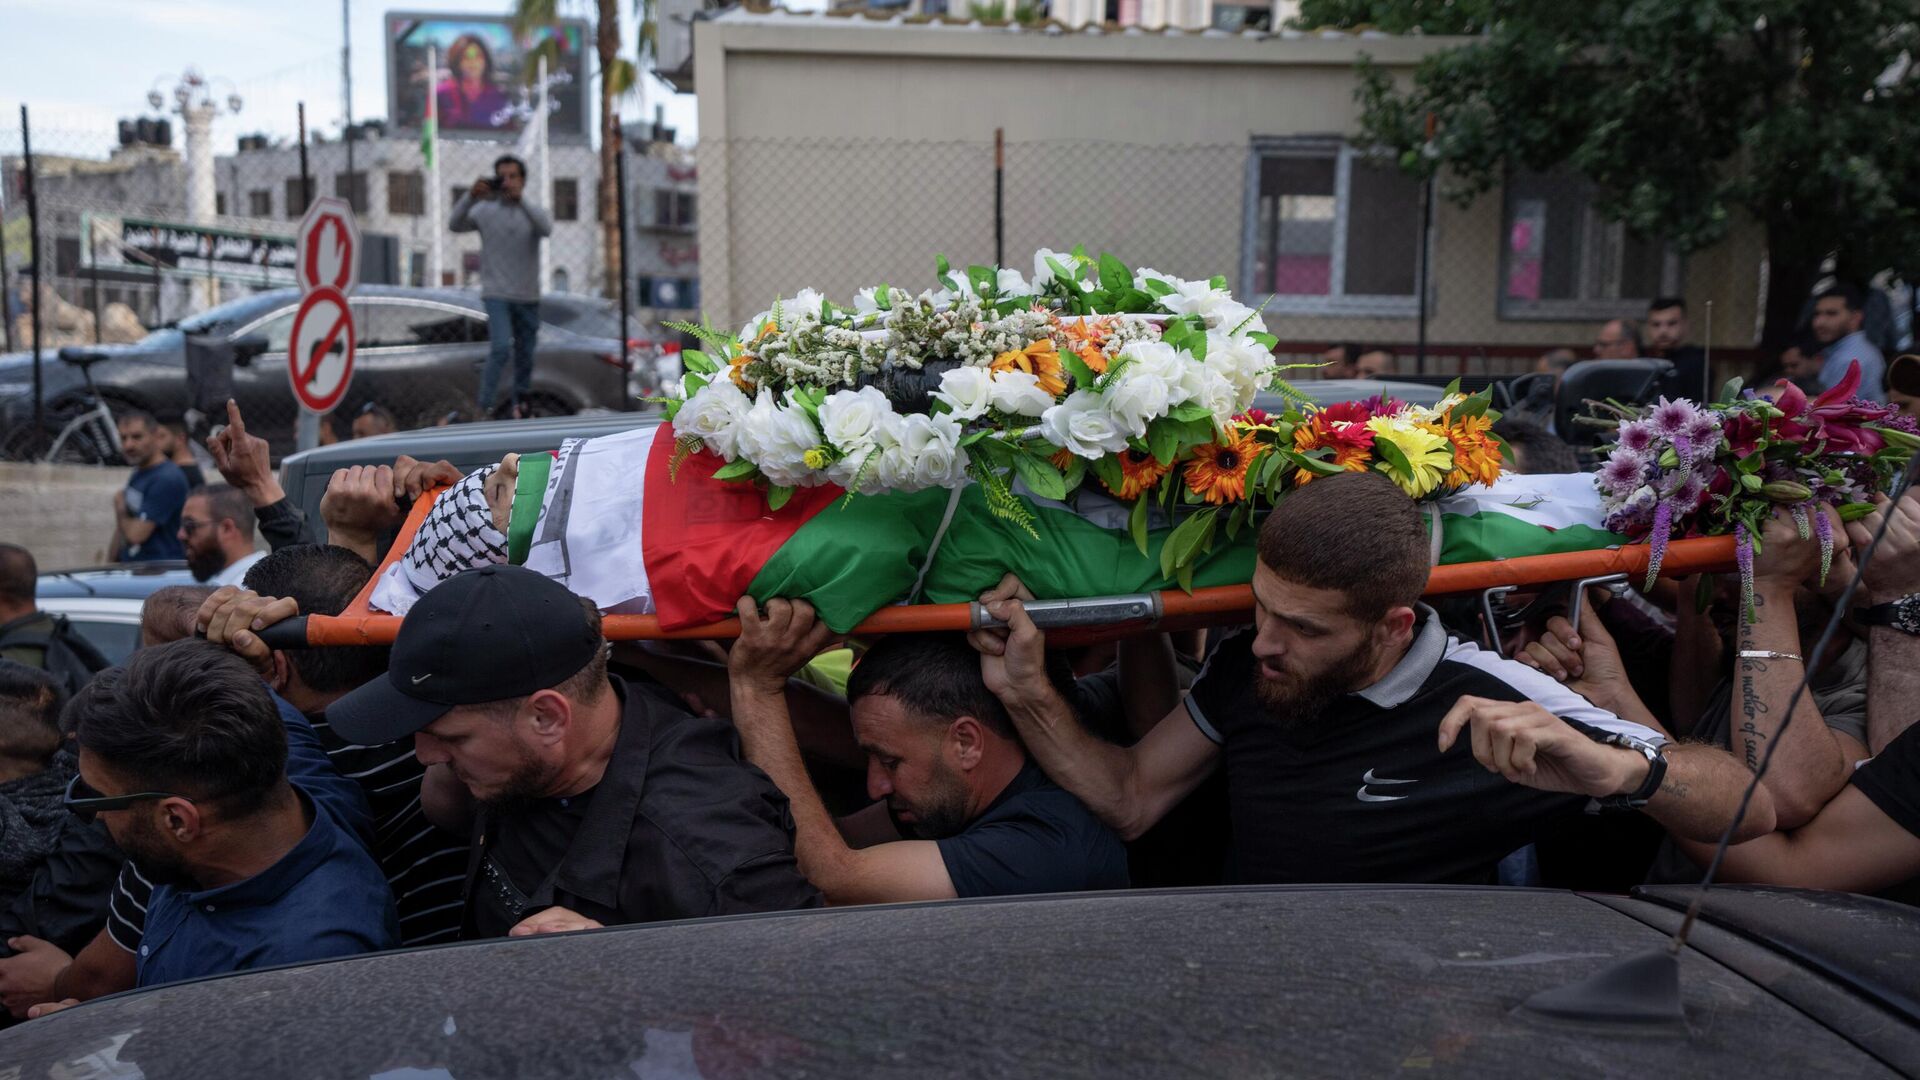 Palestinian mourners carry the body of Shireen Abu Akleh out of the office of Al Jazeera after friends and colleagues paid their respects, in the West Bank city of Ramallah, Wednesday, May 11, 2022. - Sputnik International, 1920, 19.06.2022